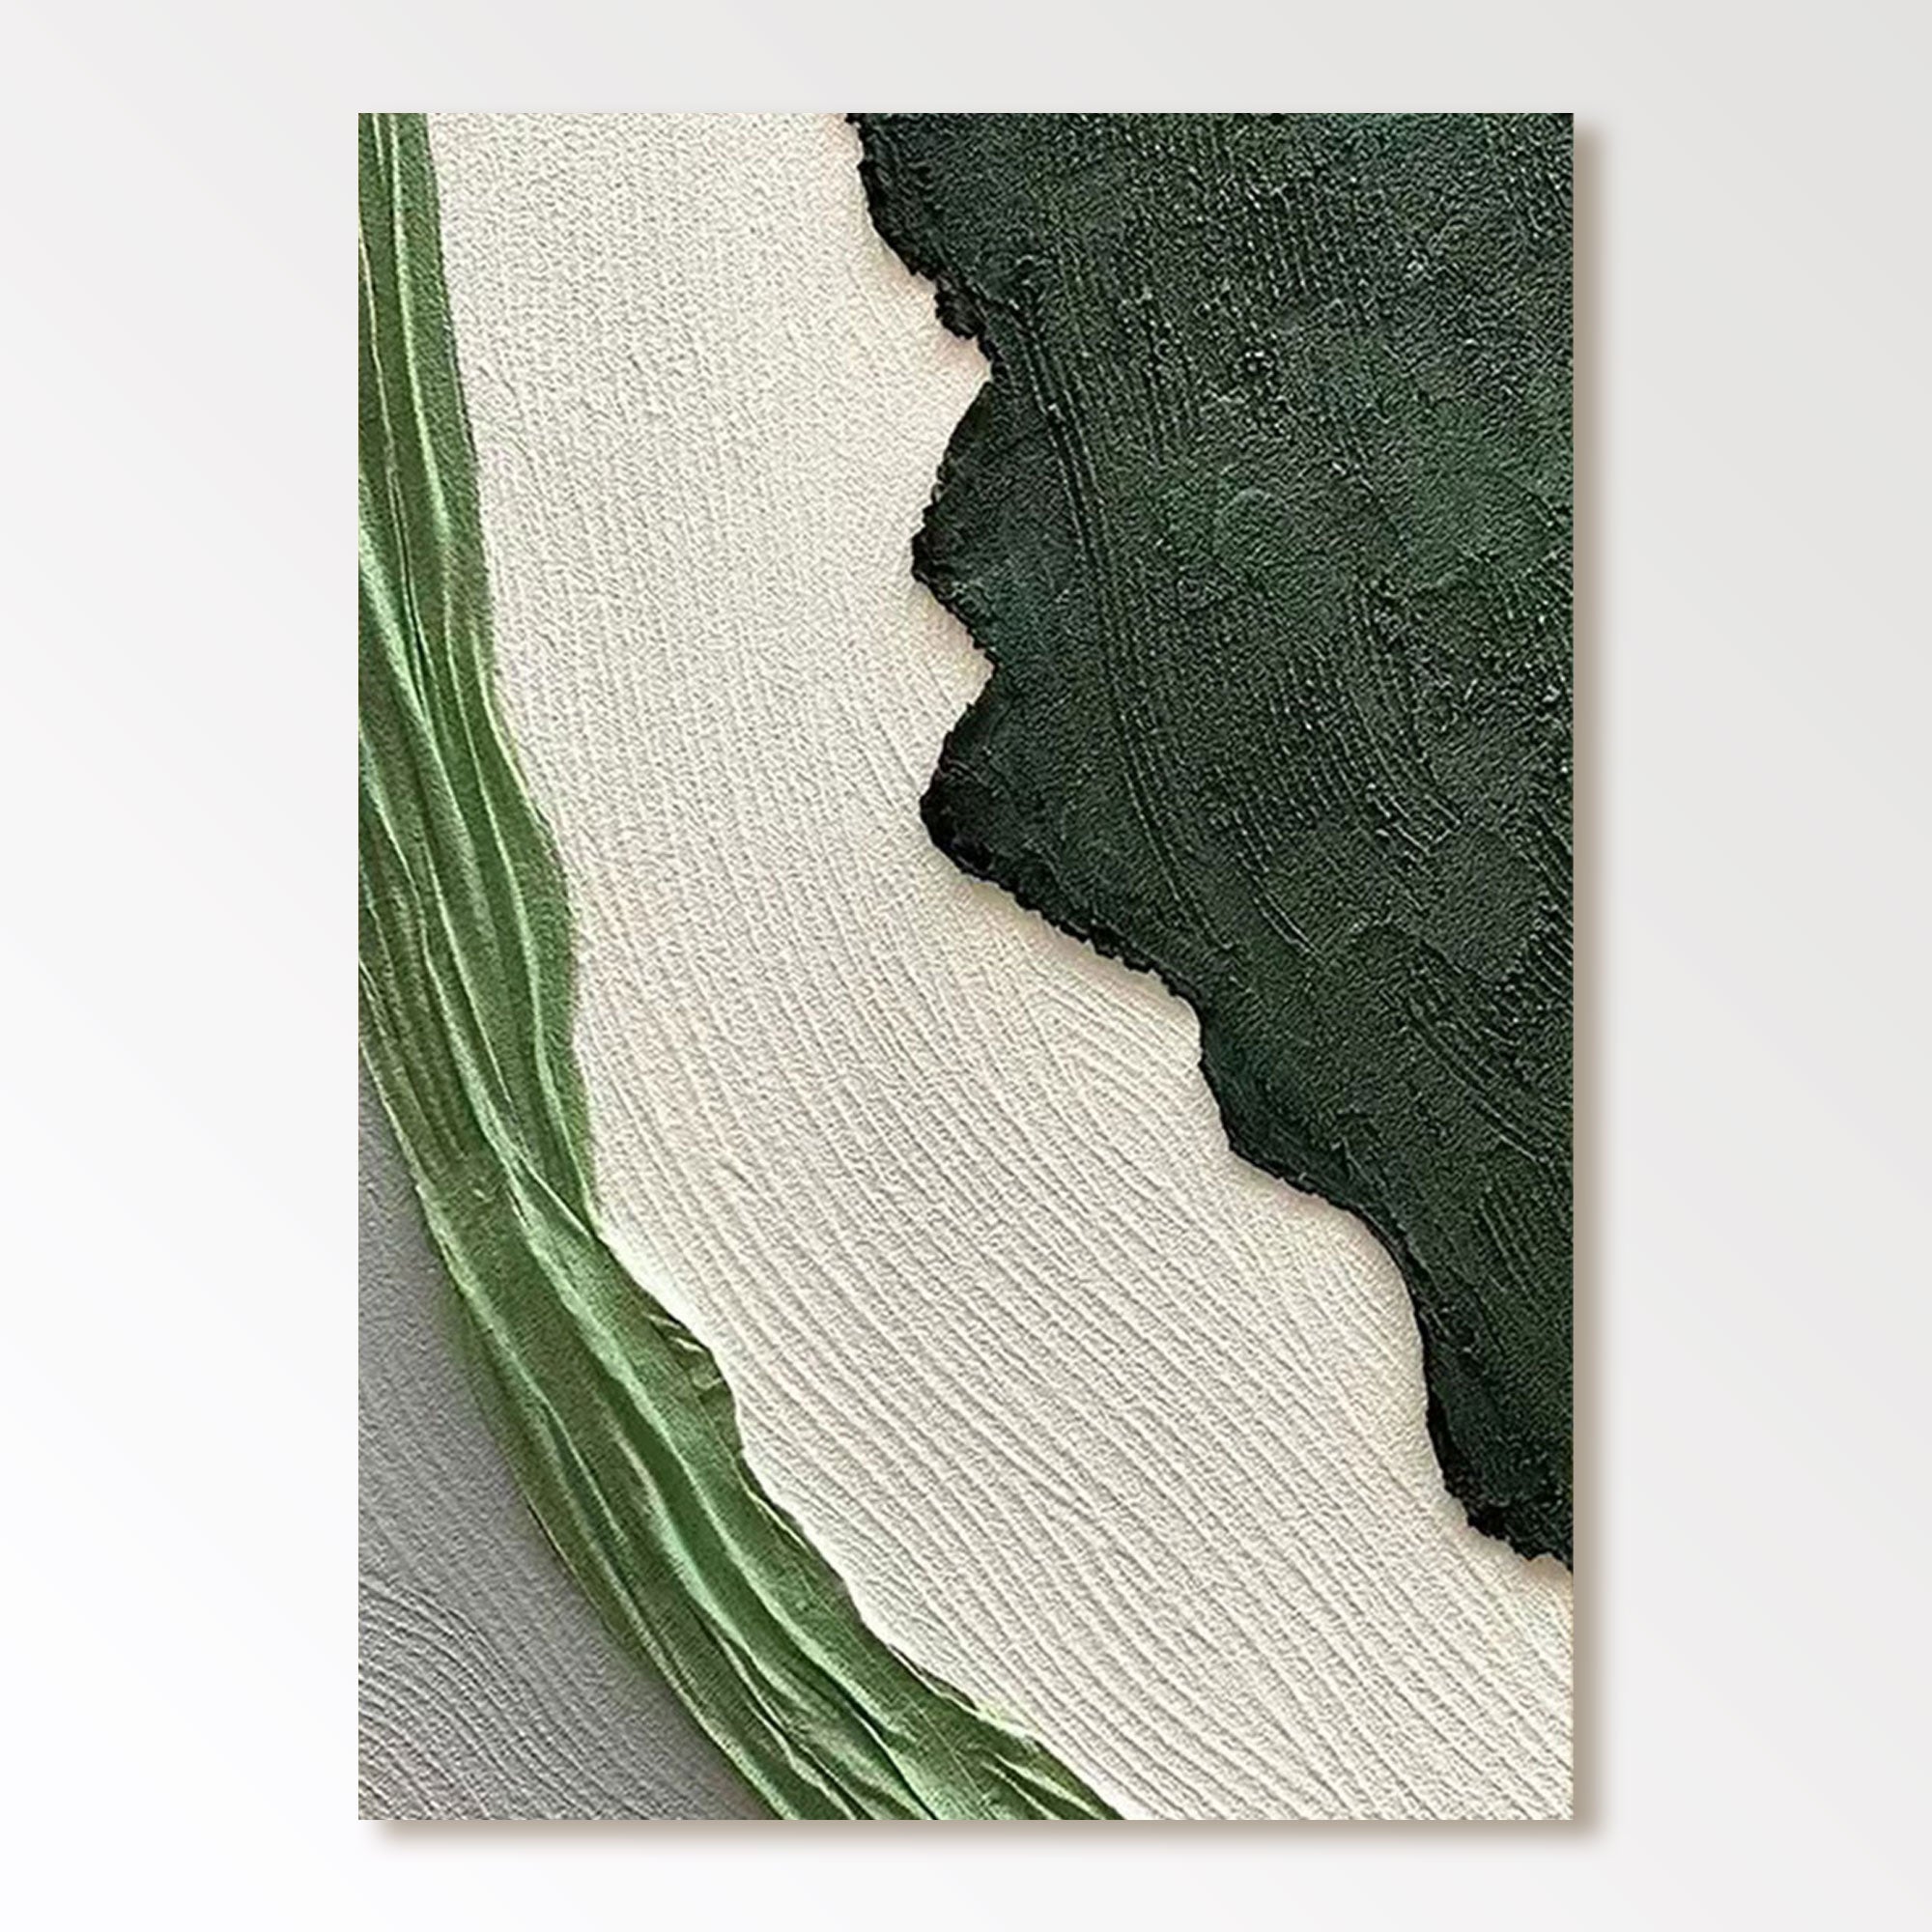 Textured Painting  "Whispers of the Verdant Breeze"